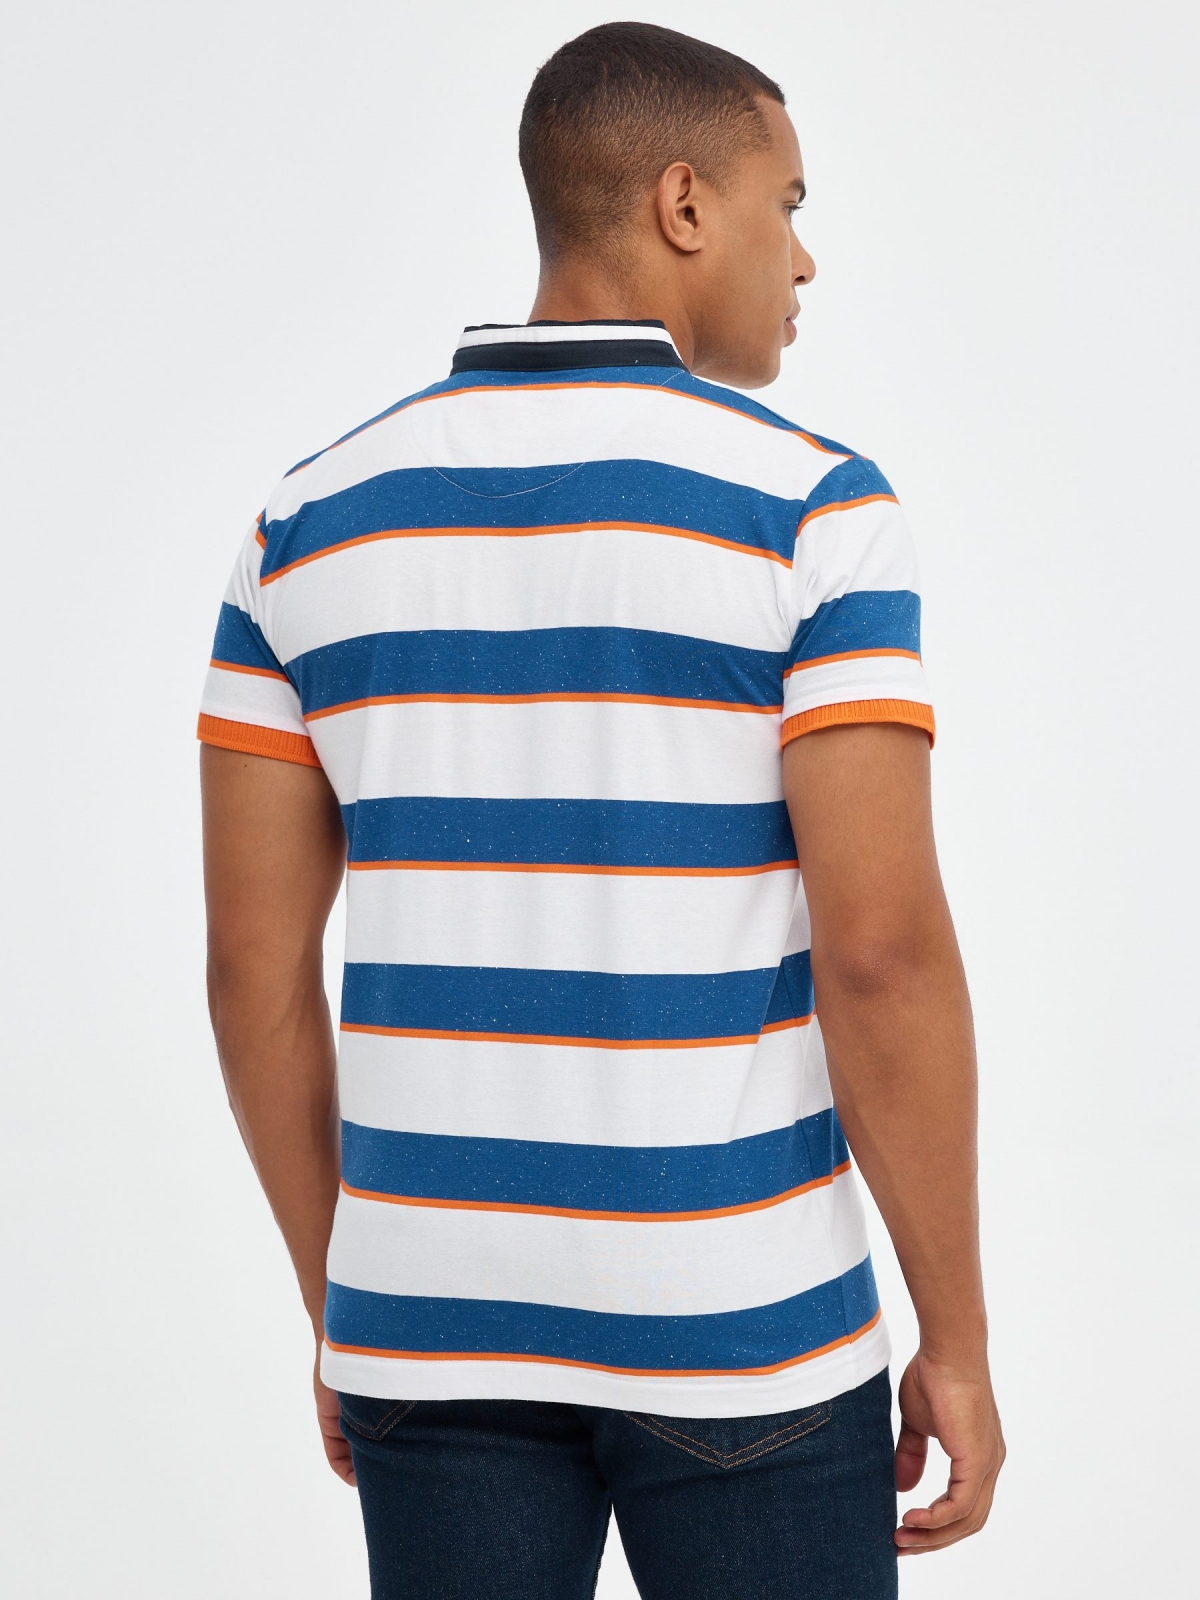 Polo mao with stripes and contrasts blue middle back view